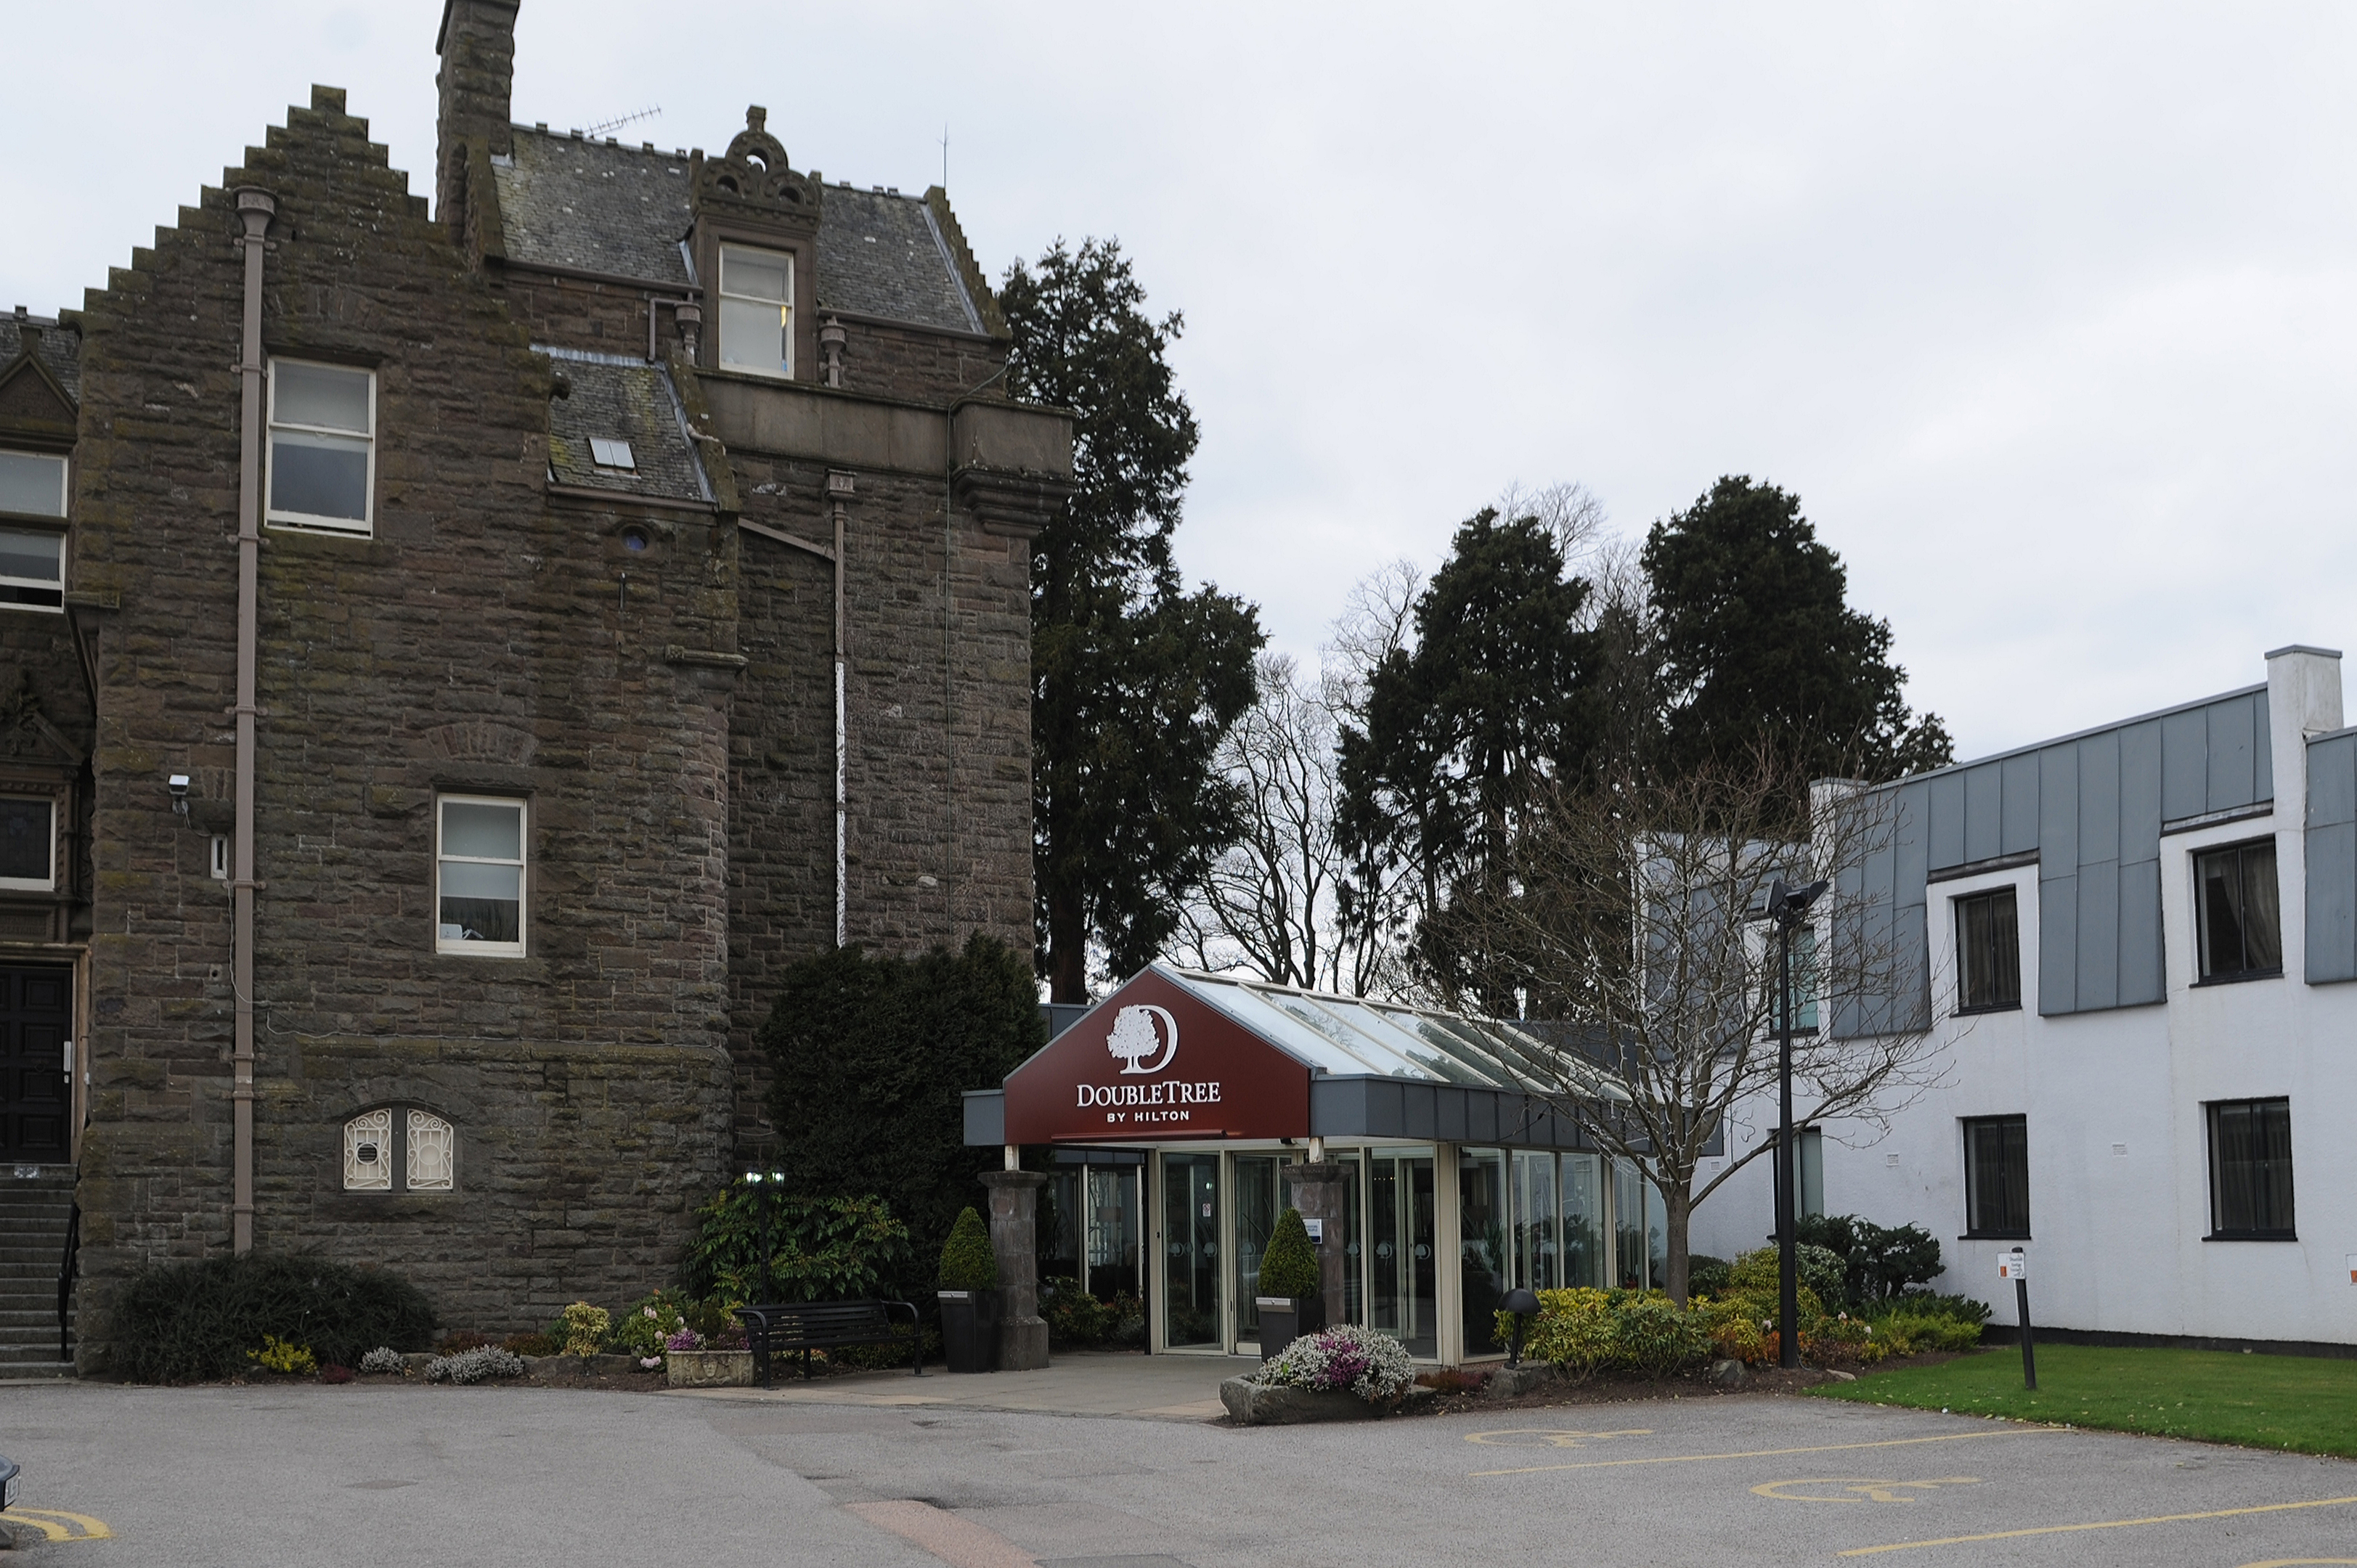 The DoubleTree by Hilton Dundee hotel has a new owner